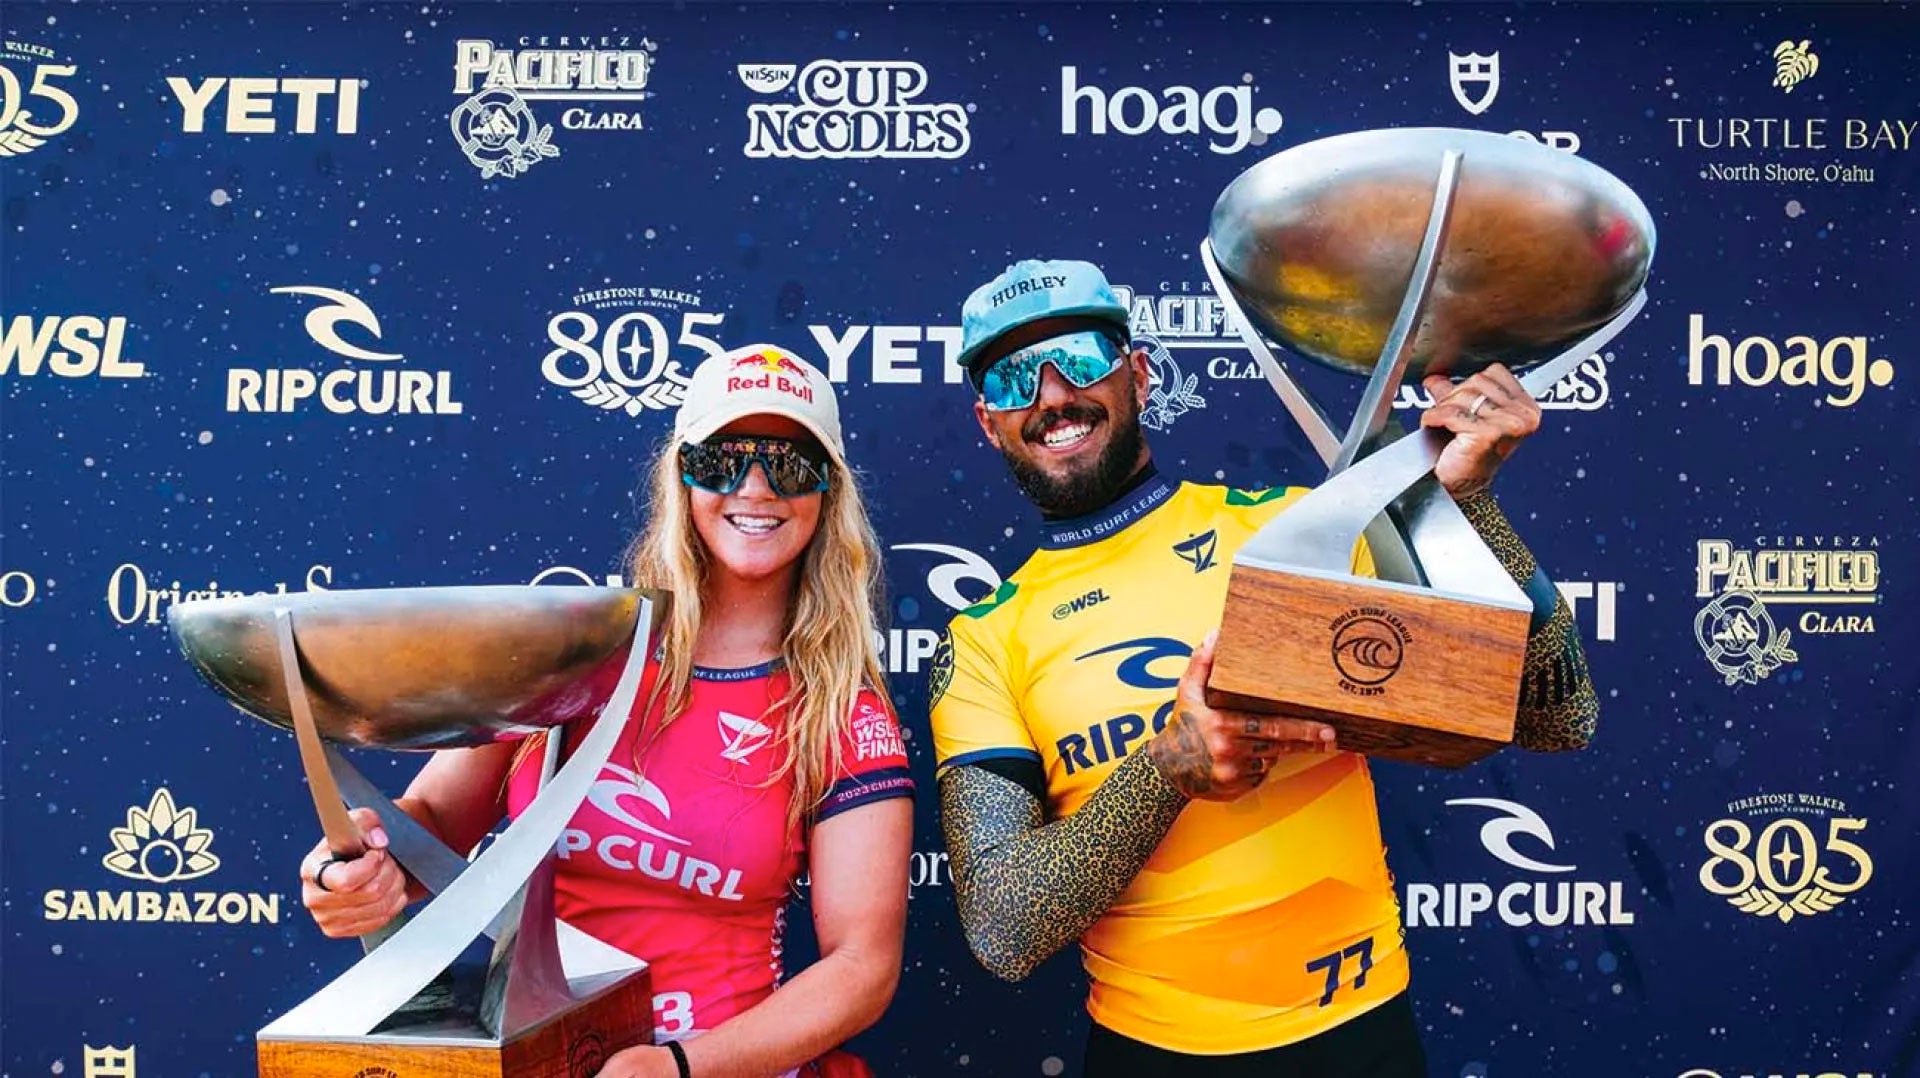 Filipe Toledo And Caroline Marks Crowned World Champions At The Rip Curl WSL Finals